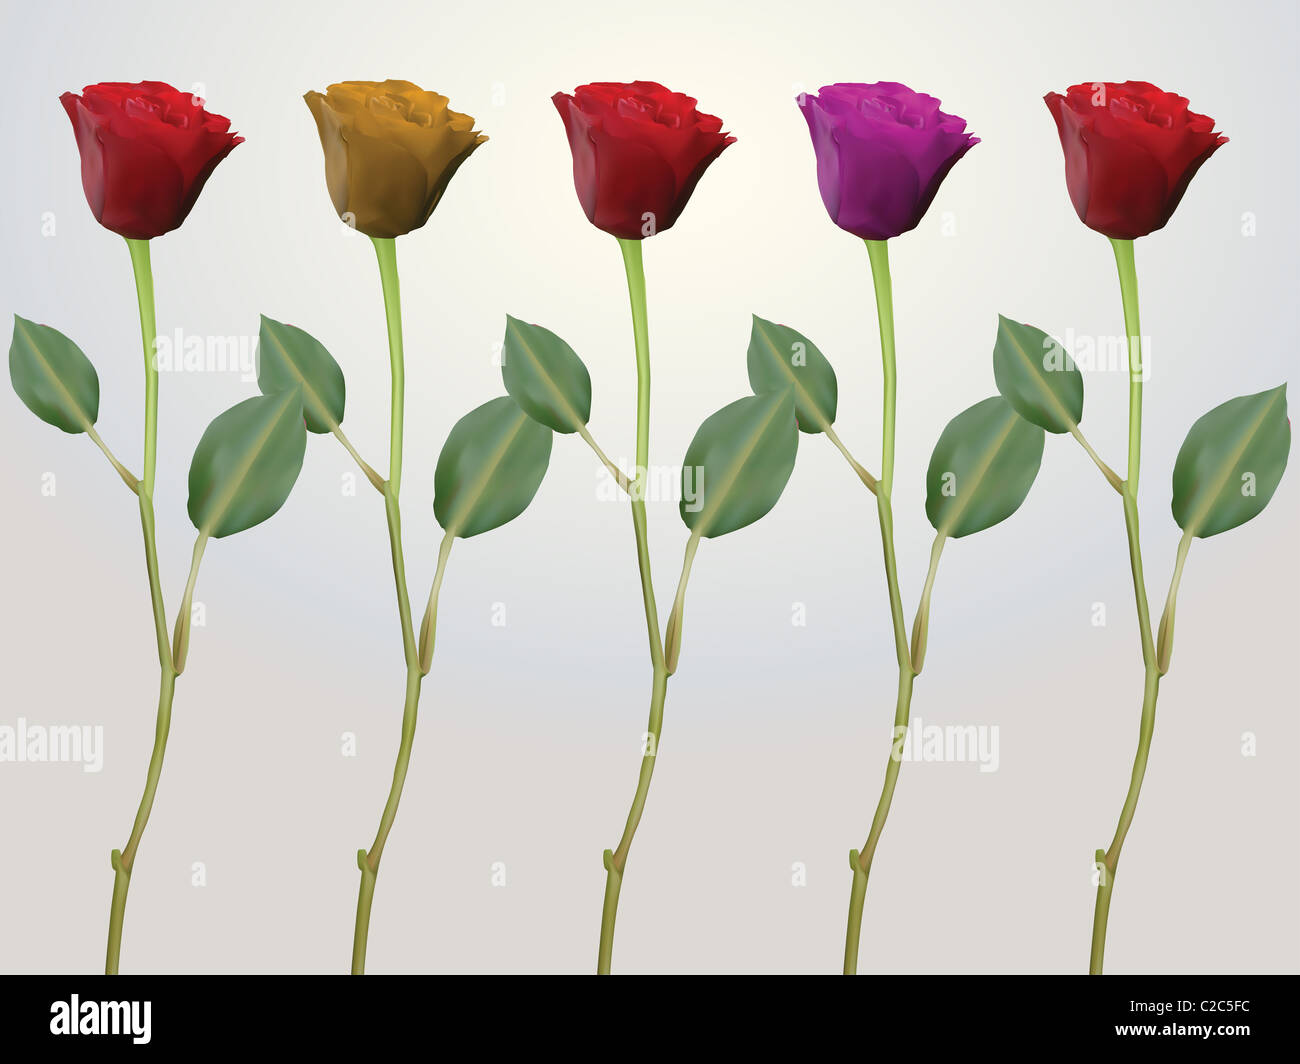 roses in red, pink and yellow on long stems with two leafs Stock Photo